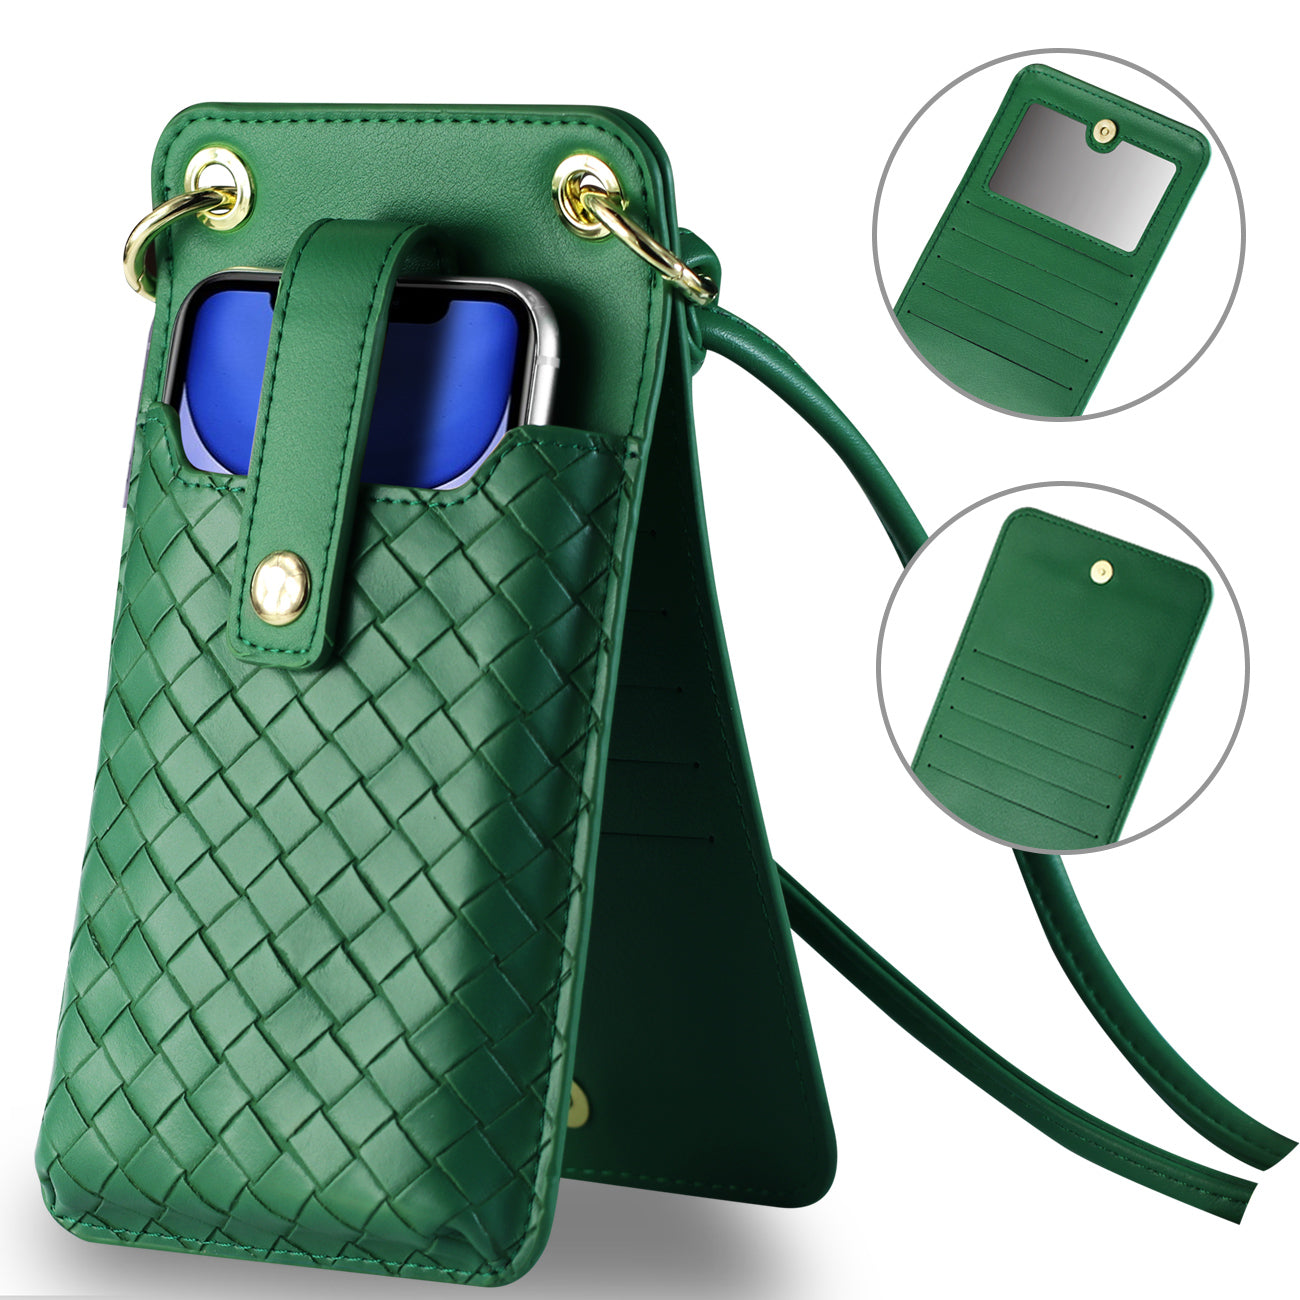 Reiko Leather Crossbody Phone Wallet Large Purse In Green（7.0 INCH)